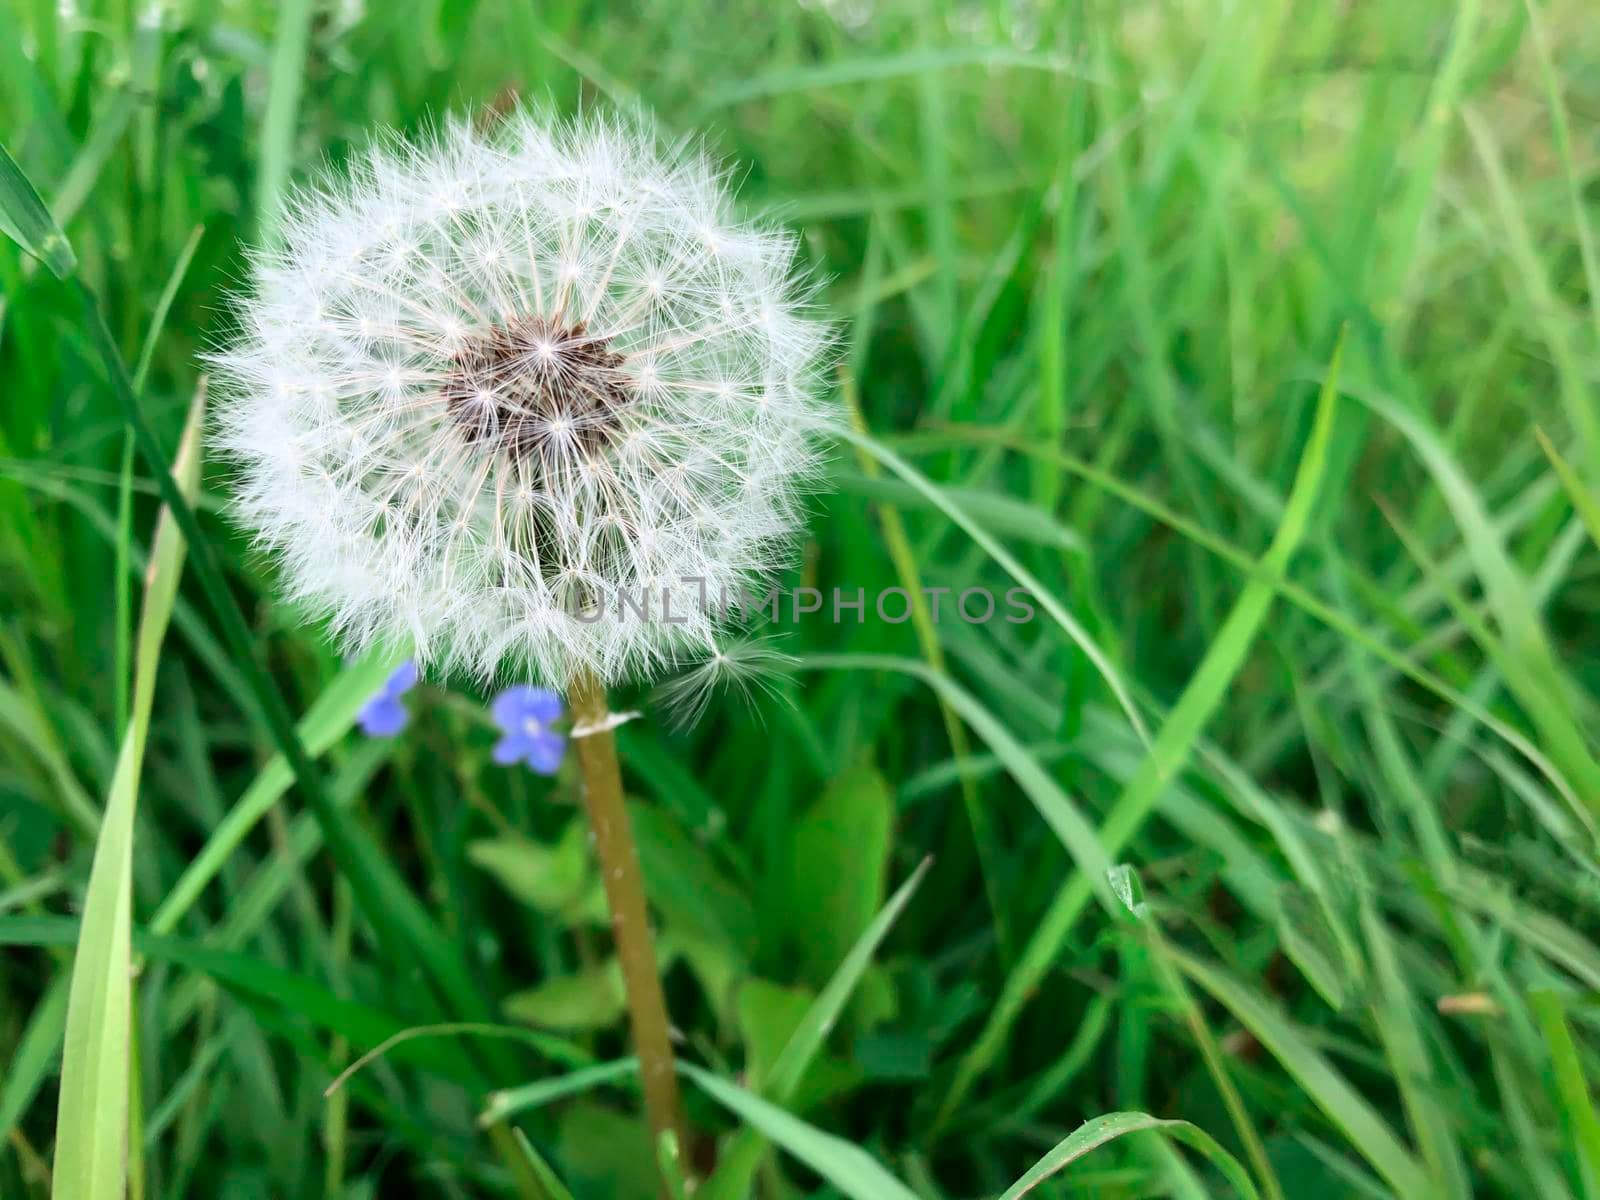 A lone white dandelion close-up in a field on a green background.